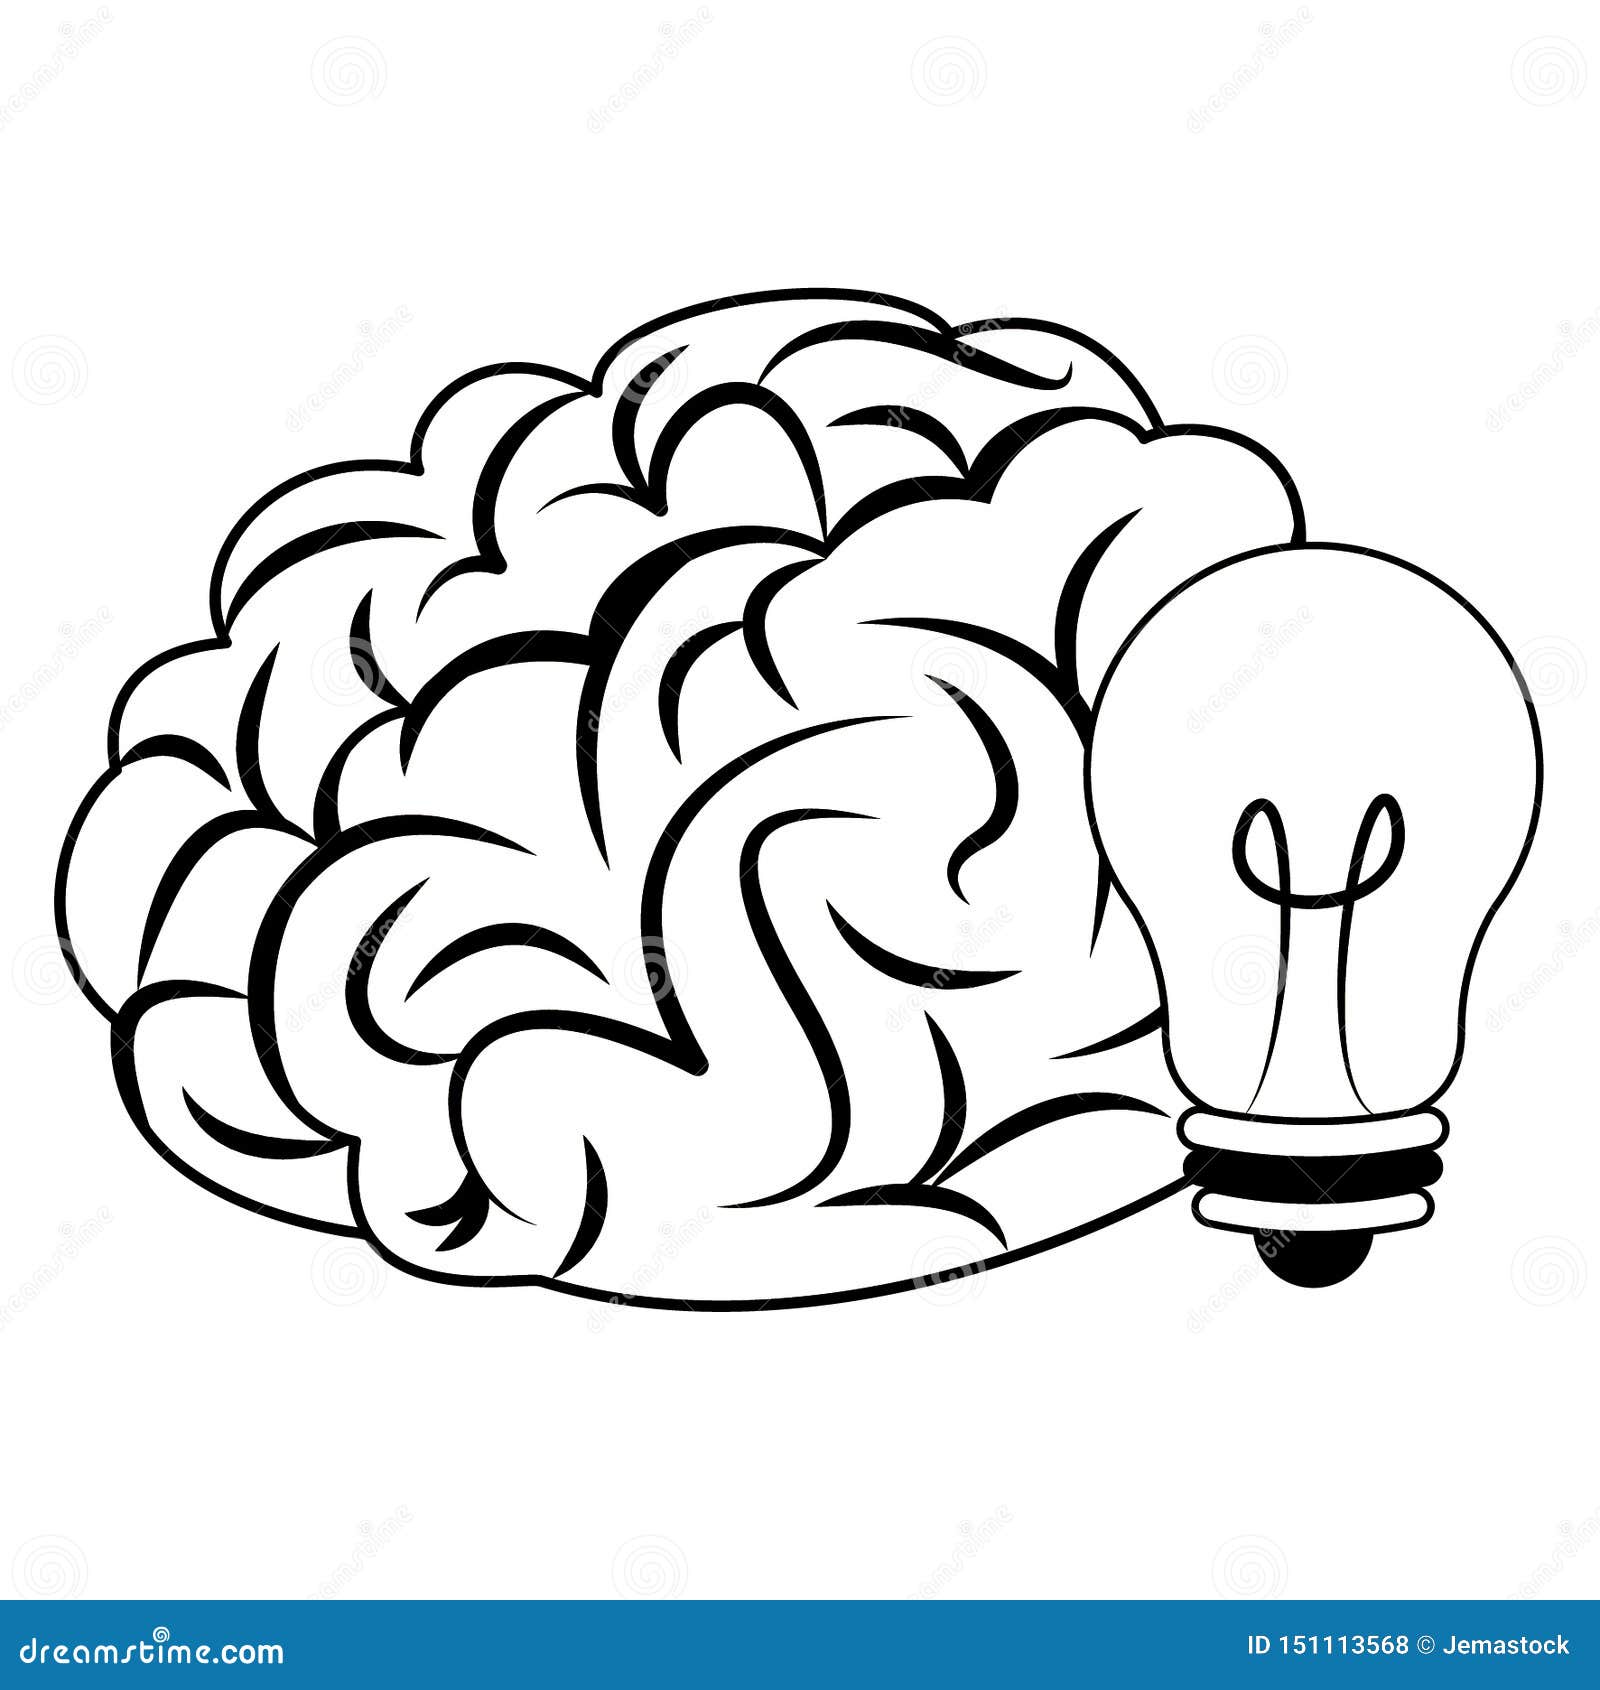 Human Brain Intelligence and Creativity Cartoons in Black and White ...